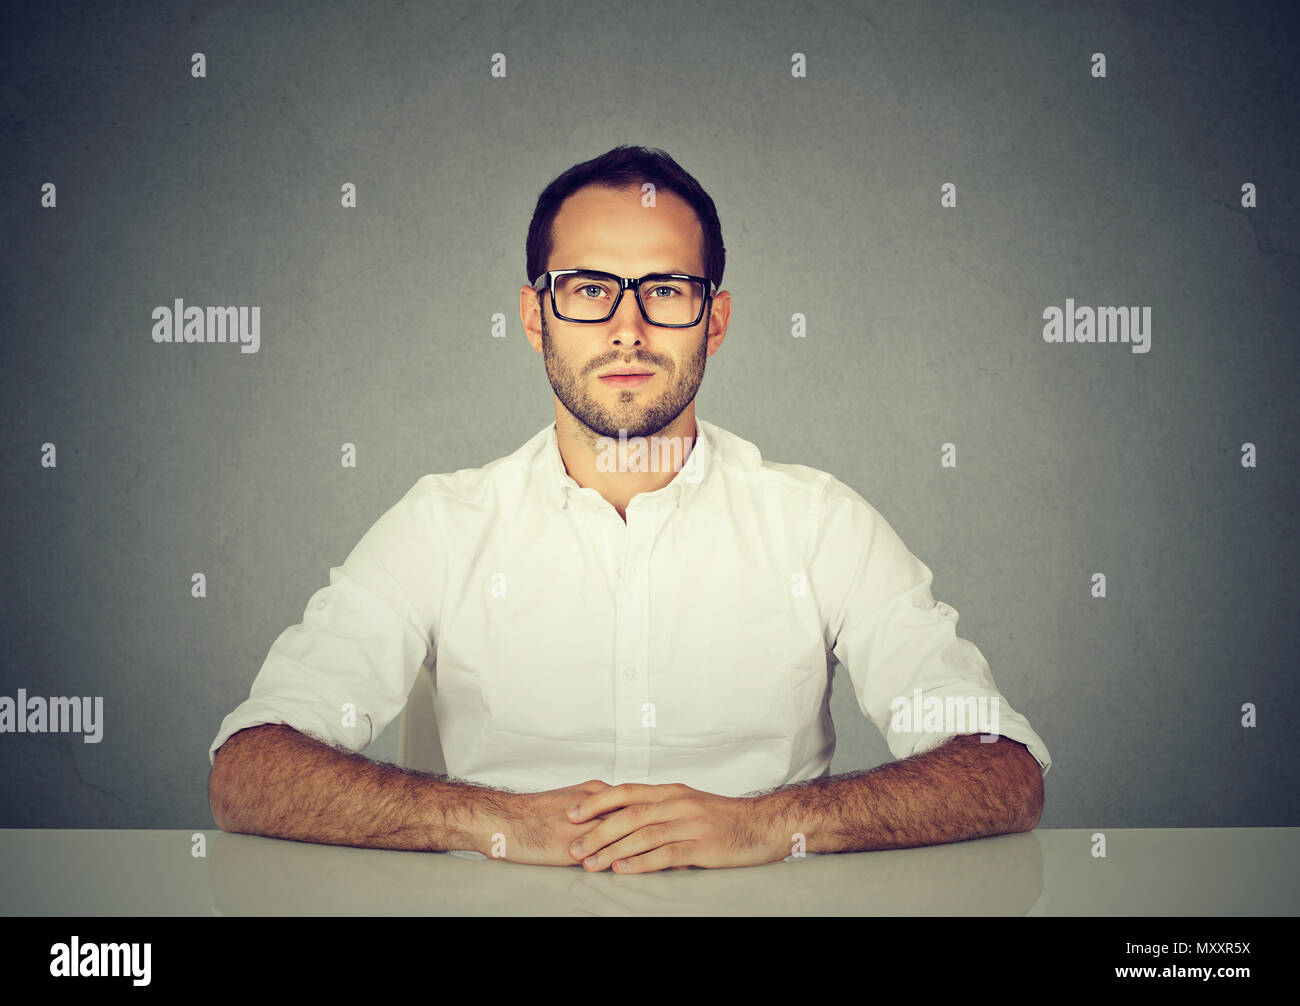 Handsome man wearing white shirt and elegant glasses sitting at table looking highly qualified employee Stock Photo